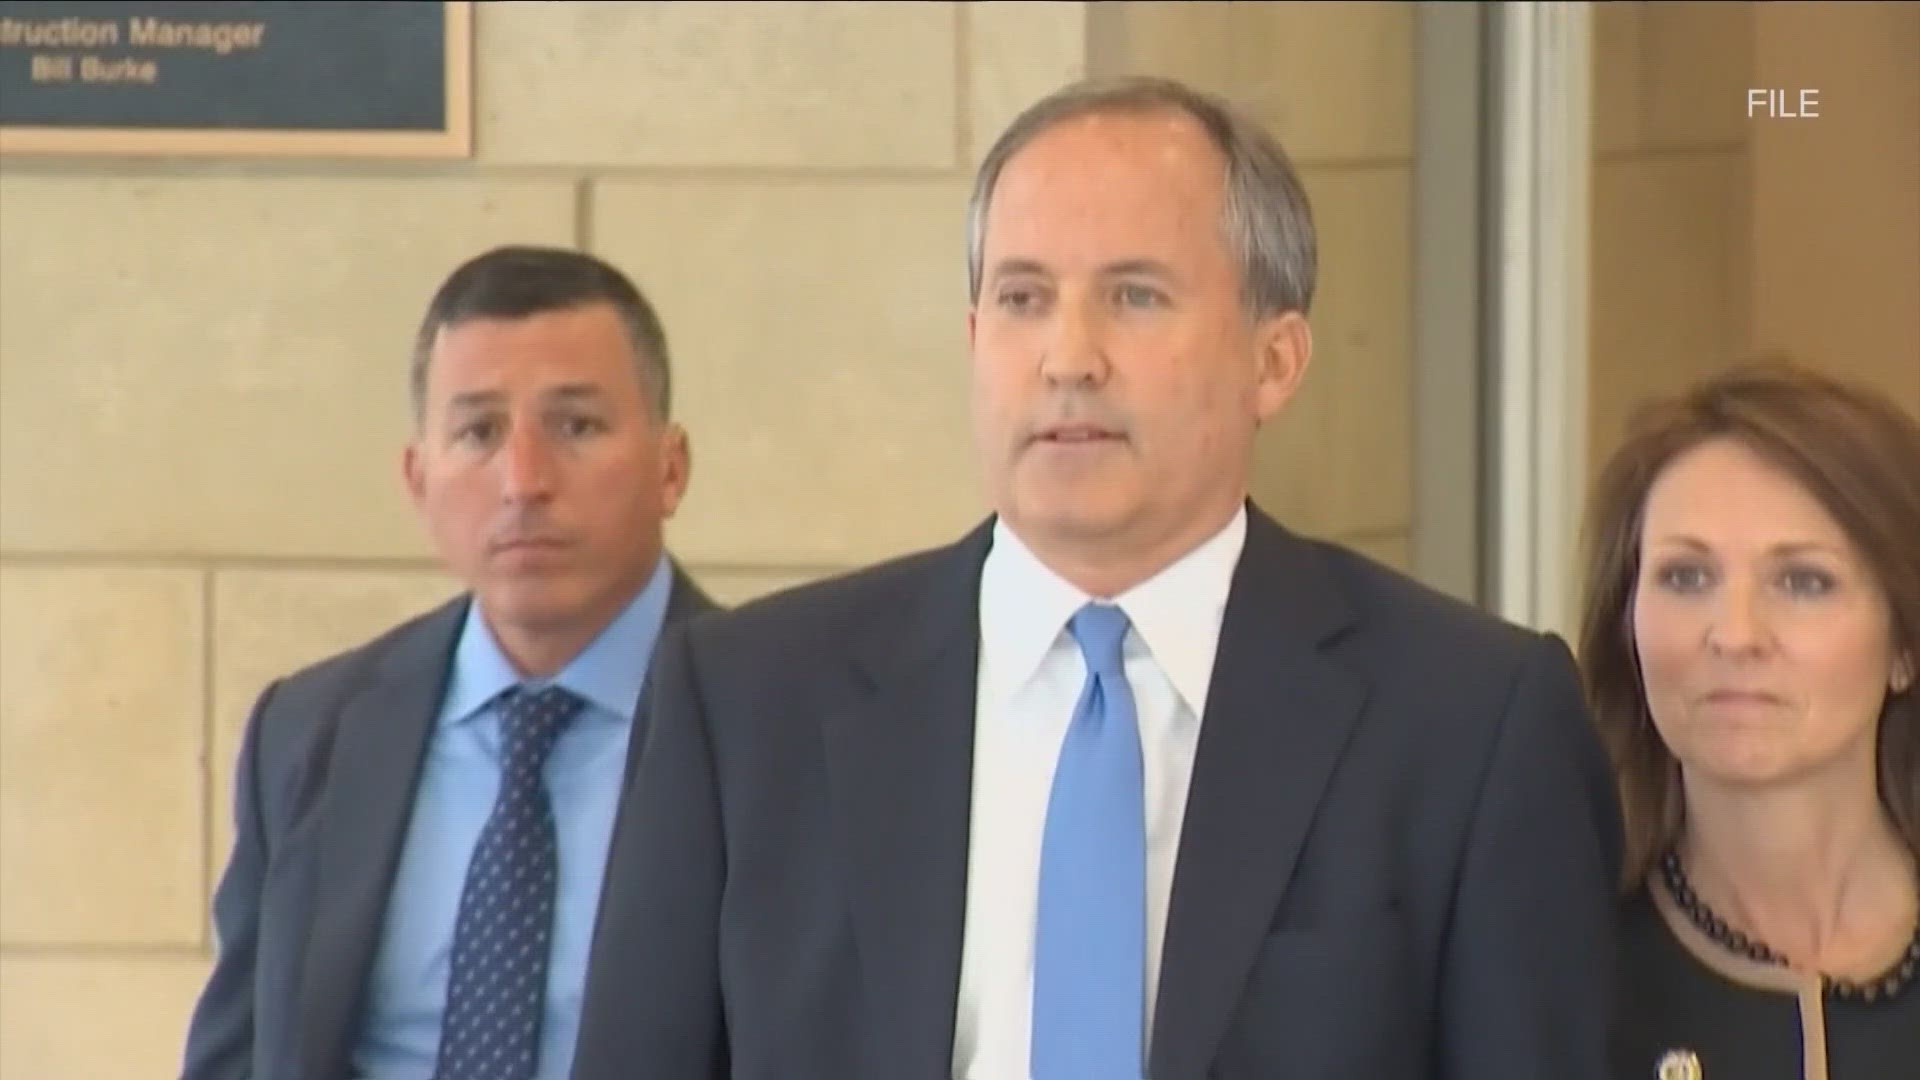 Prosecutors announced the deal with Paxton that would drop securities fraud charges that had been pending against him for more than 9 years.